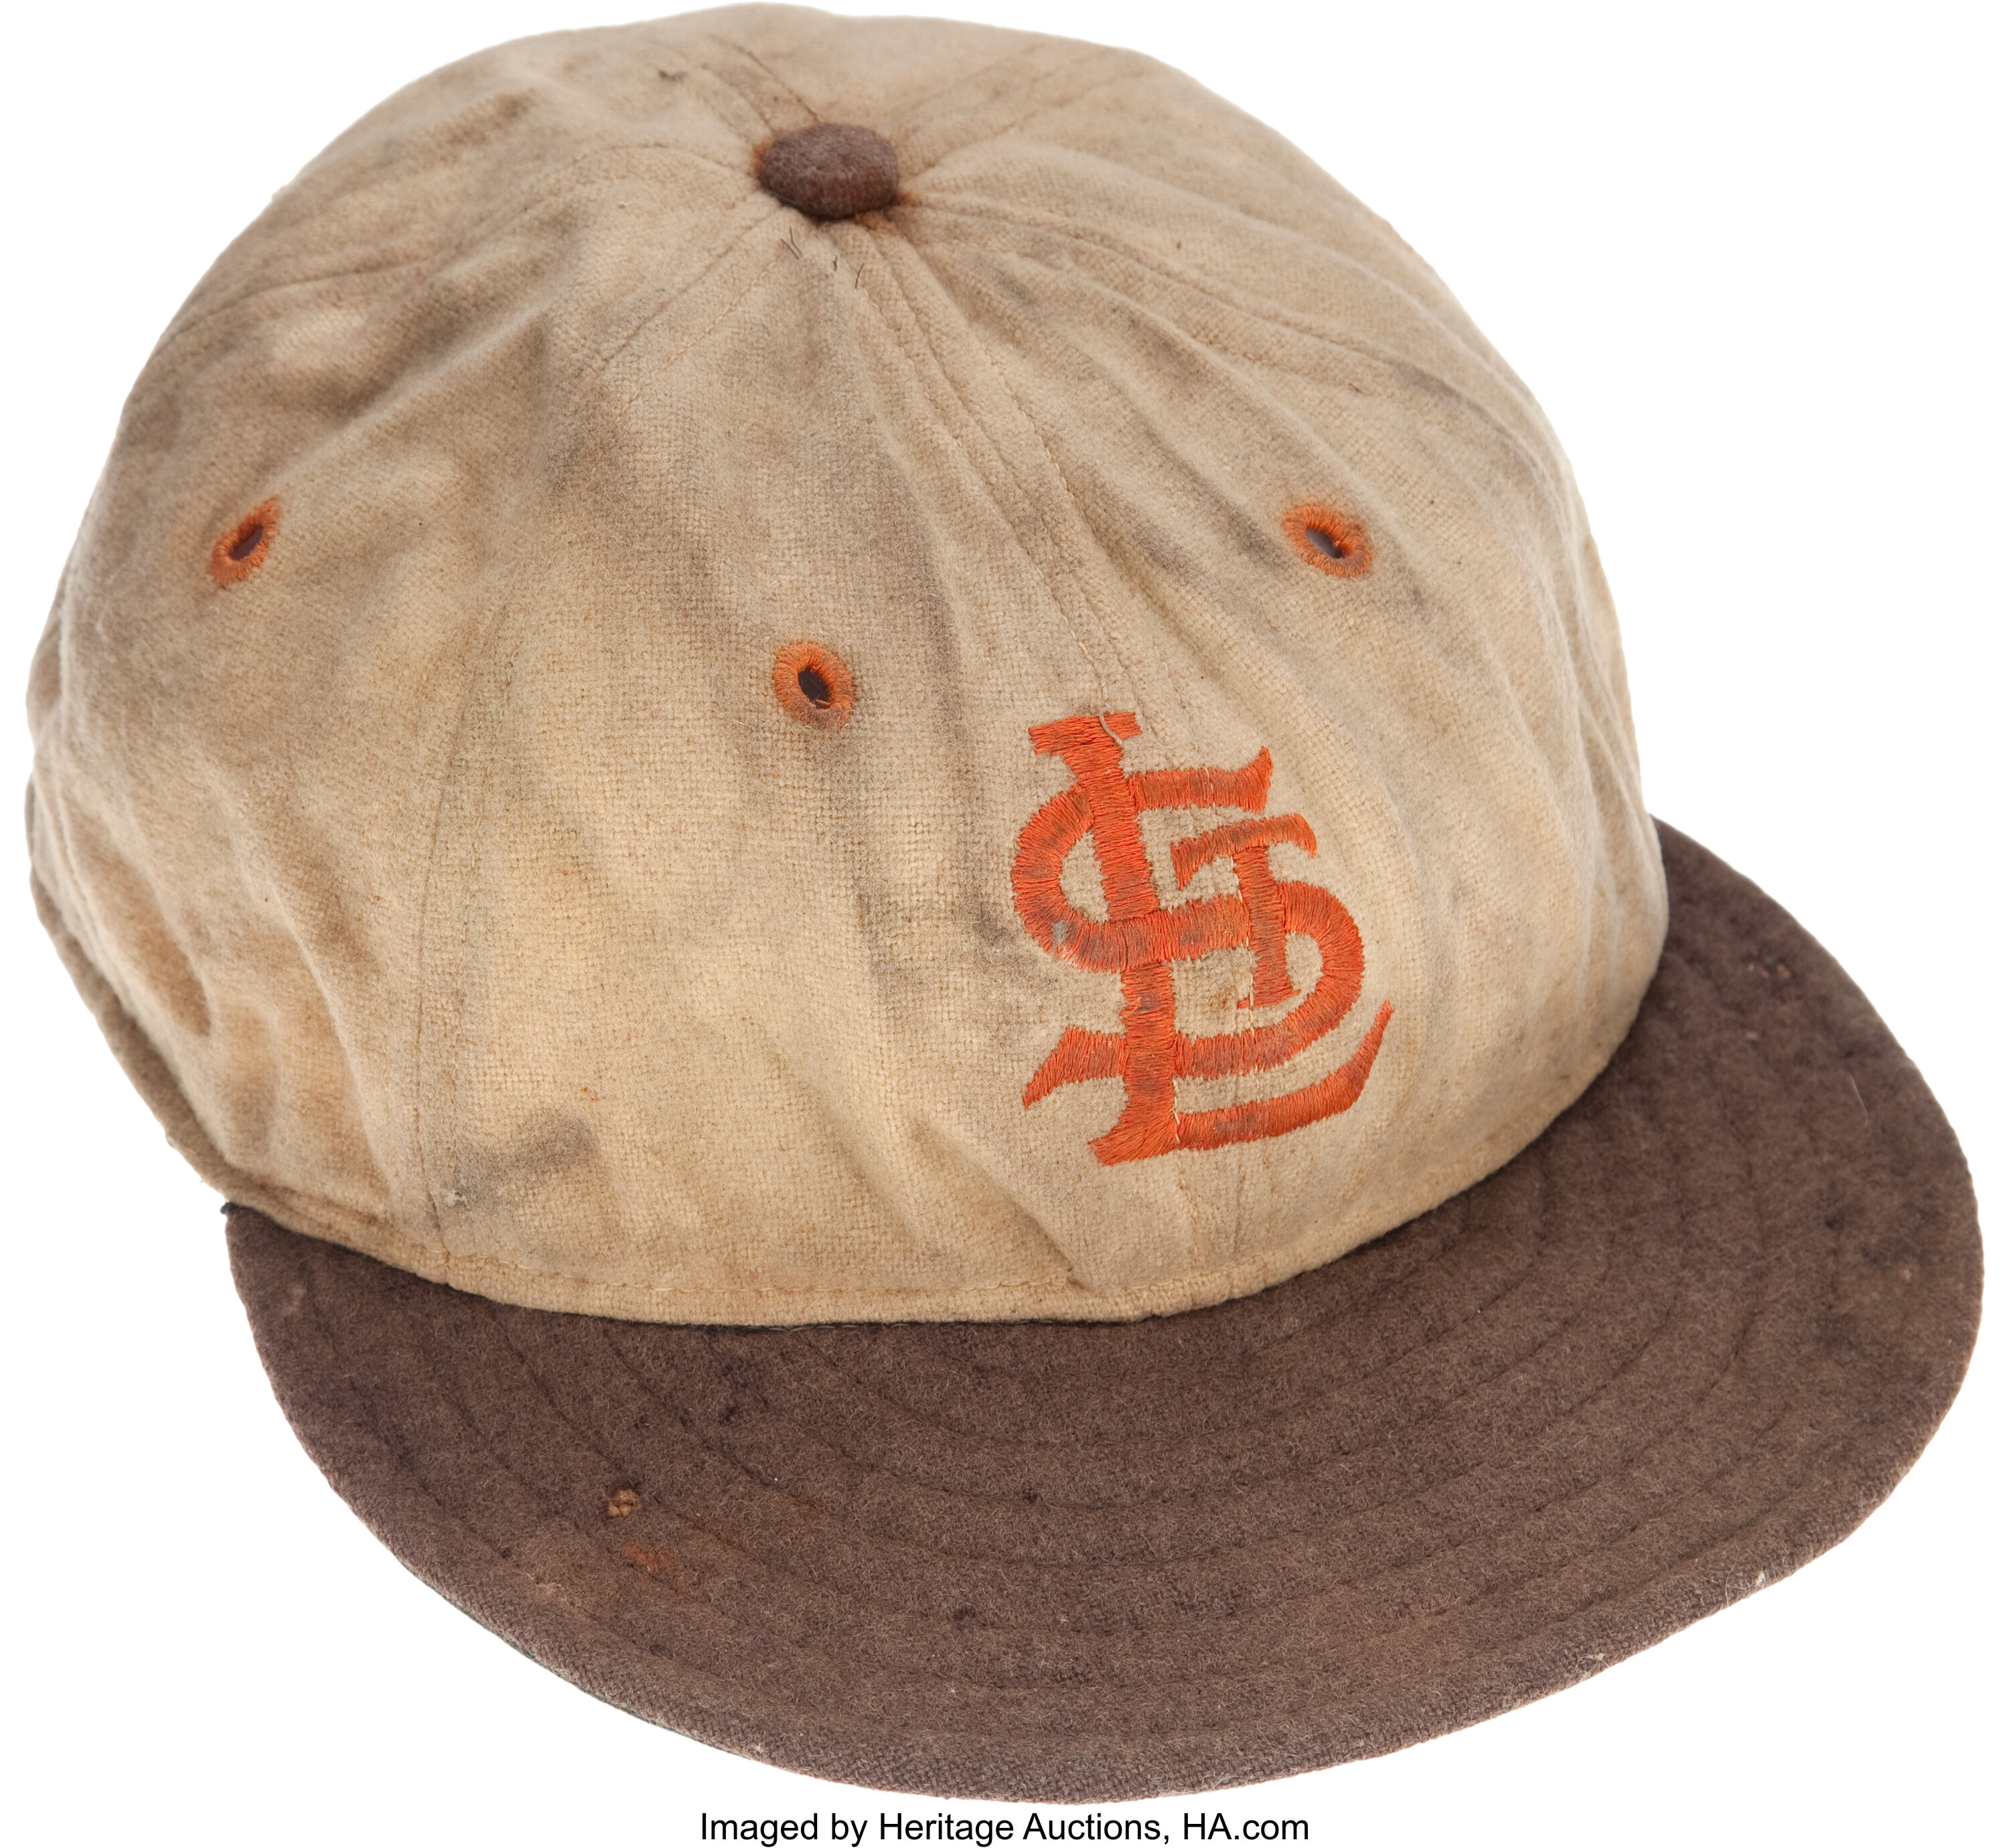 1952 St. Louis Browns Hat by Vintage Brand